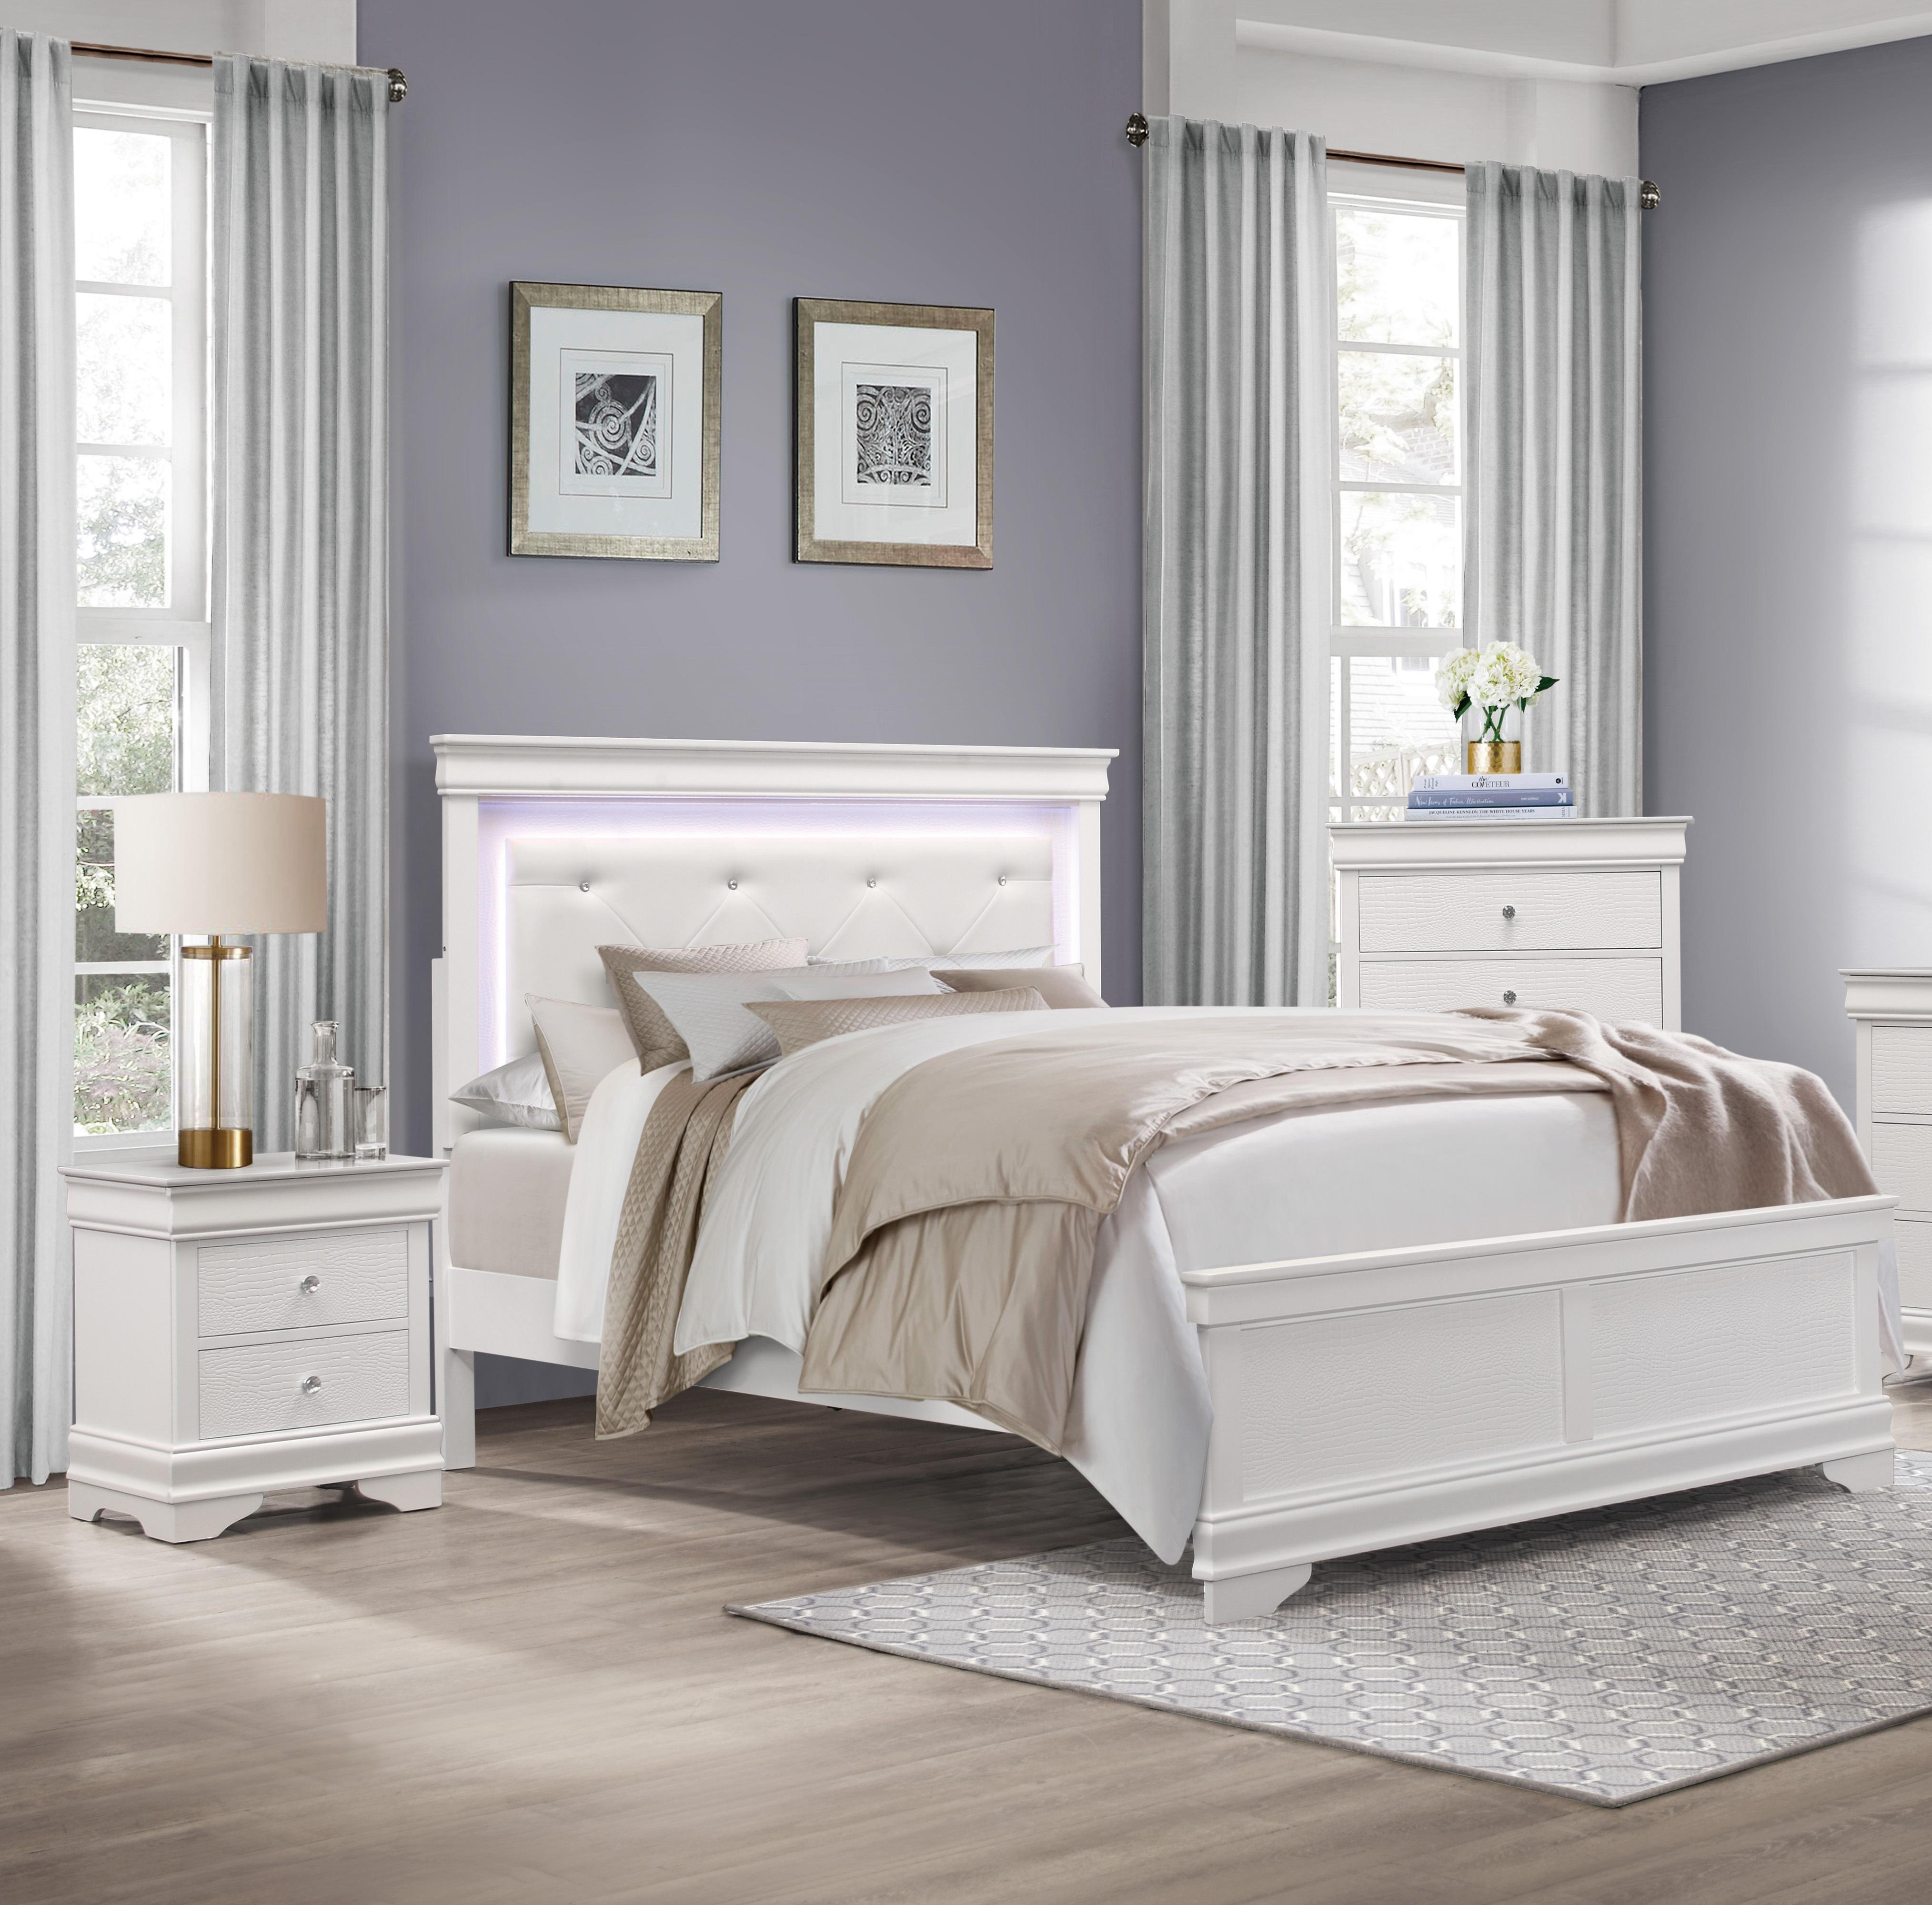 Traditional Bedroom Set 1556WF-1-3PC Lana 1556WF-1-3PC in White Faux Leather